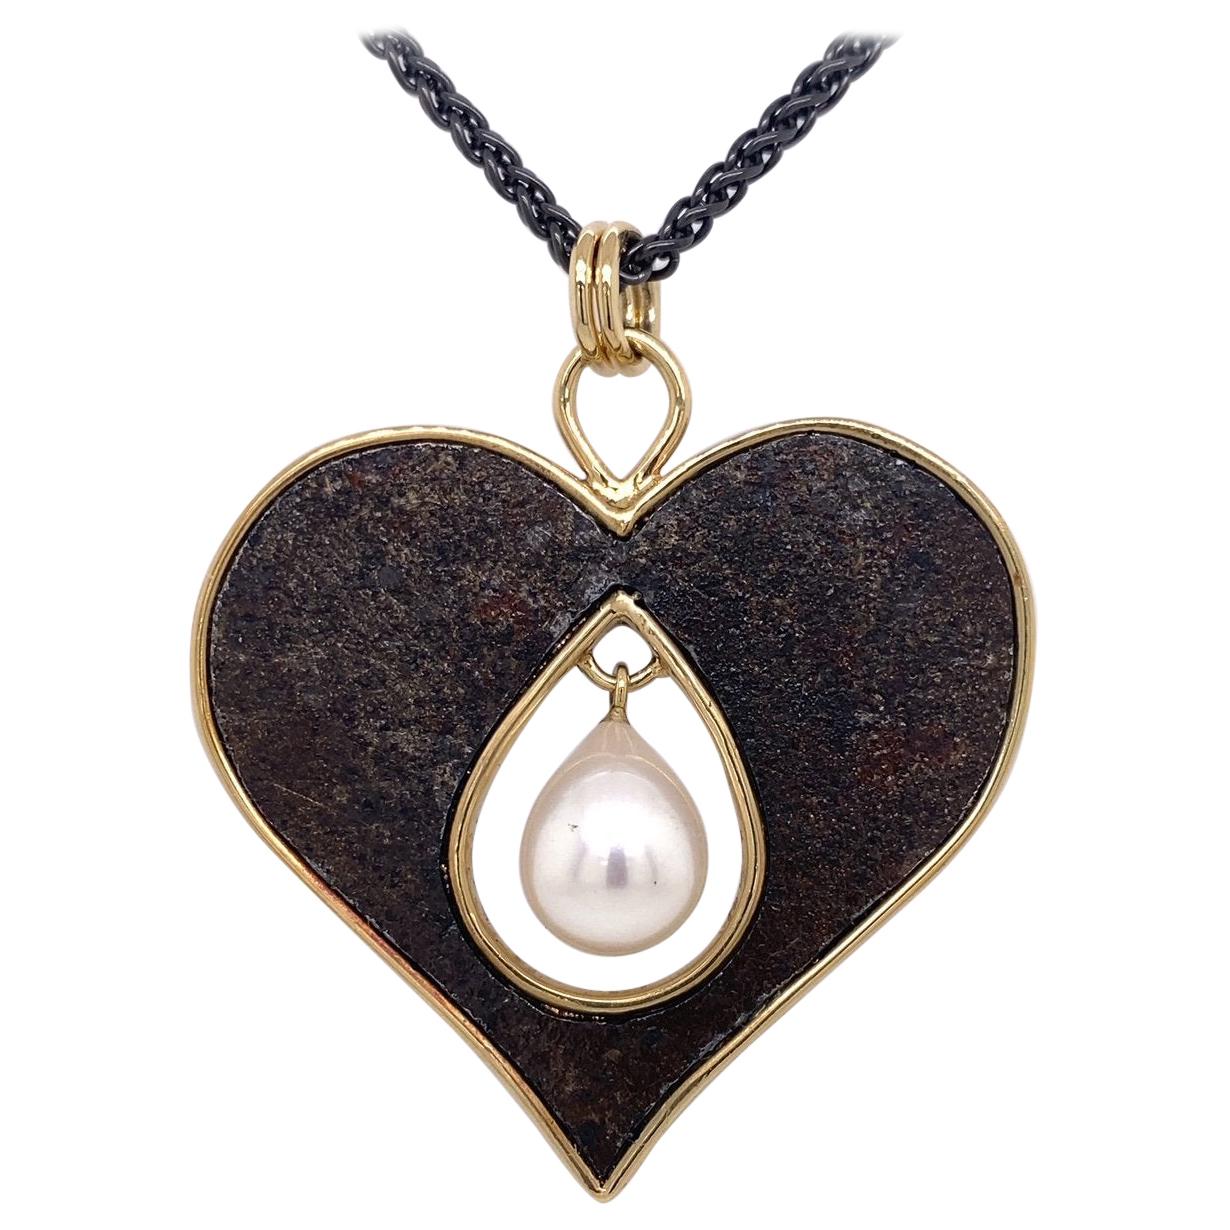 18 Karat, Sterling Silver, and Rusted Iron Heart Necklace with a Pearl